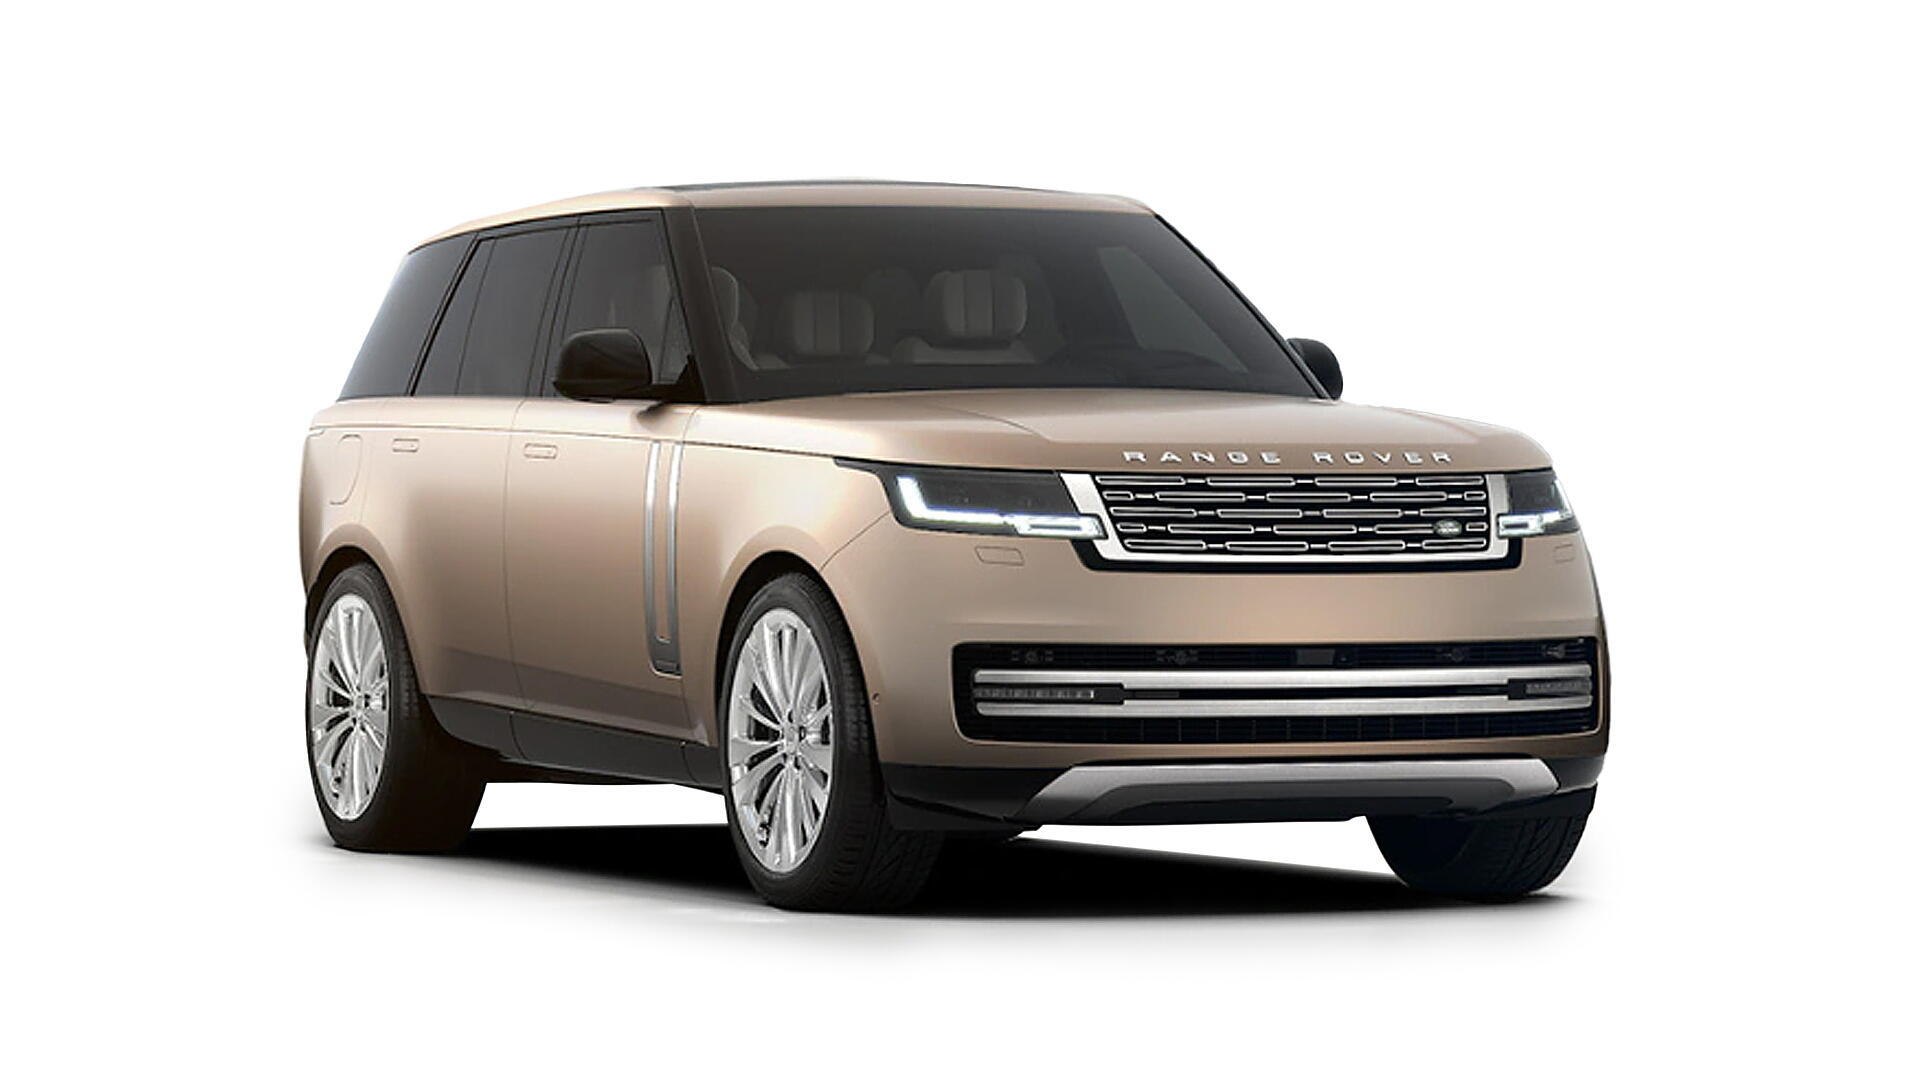 Land Rover Range Rover Images